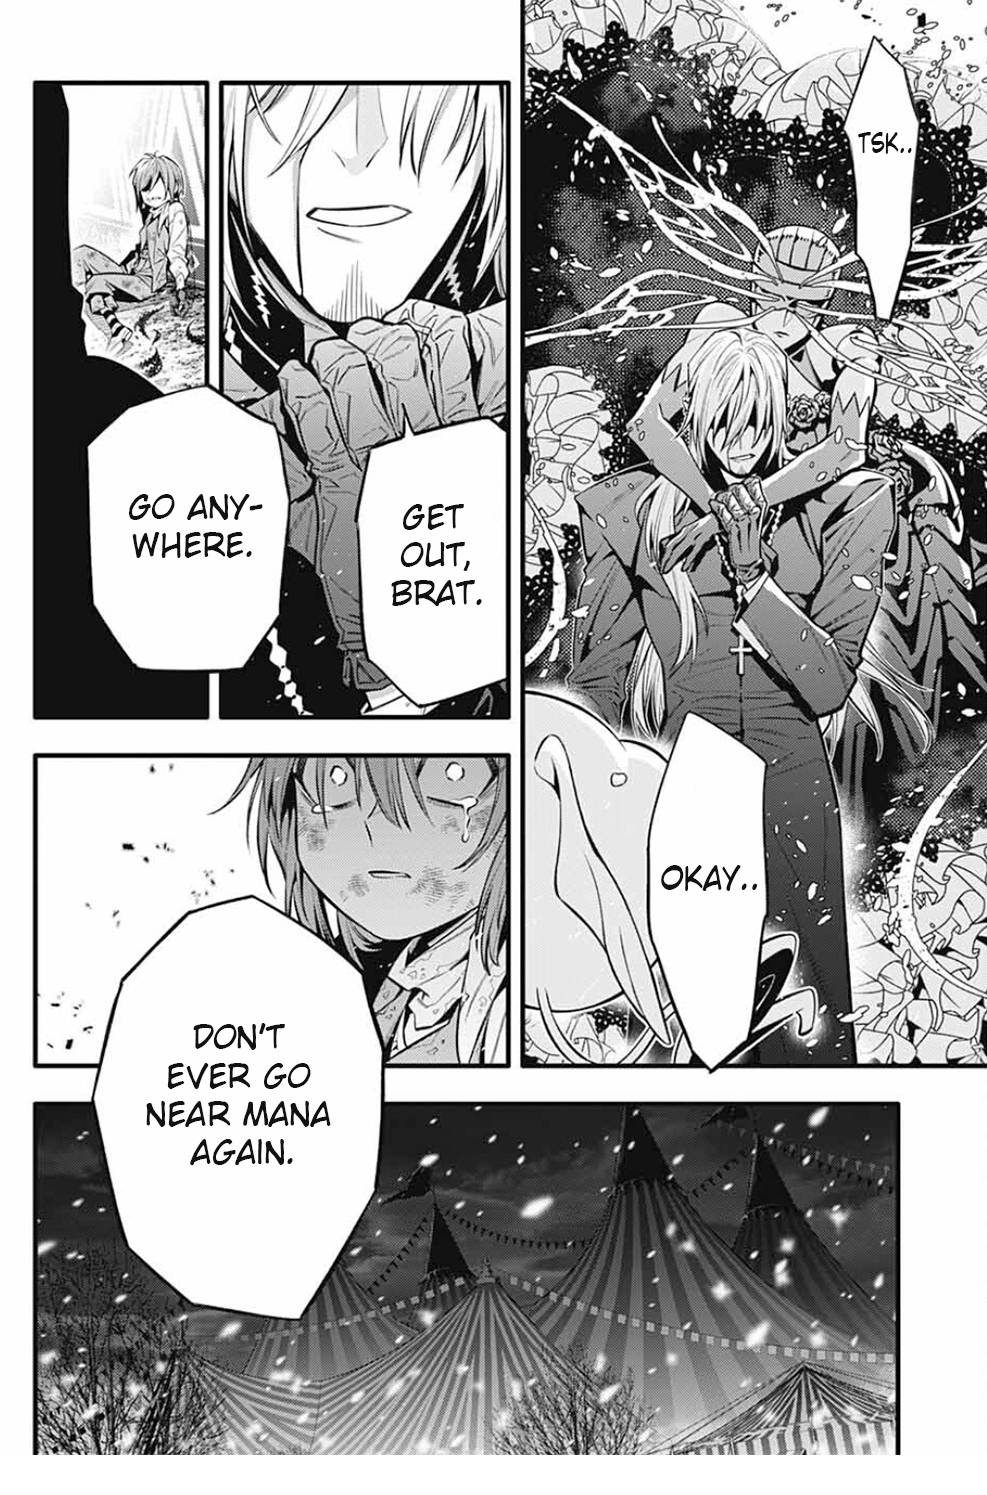 D.Gray-man chapter 245 page 11